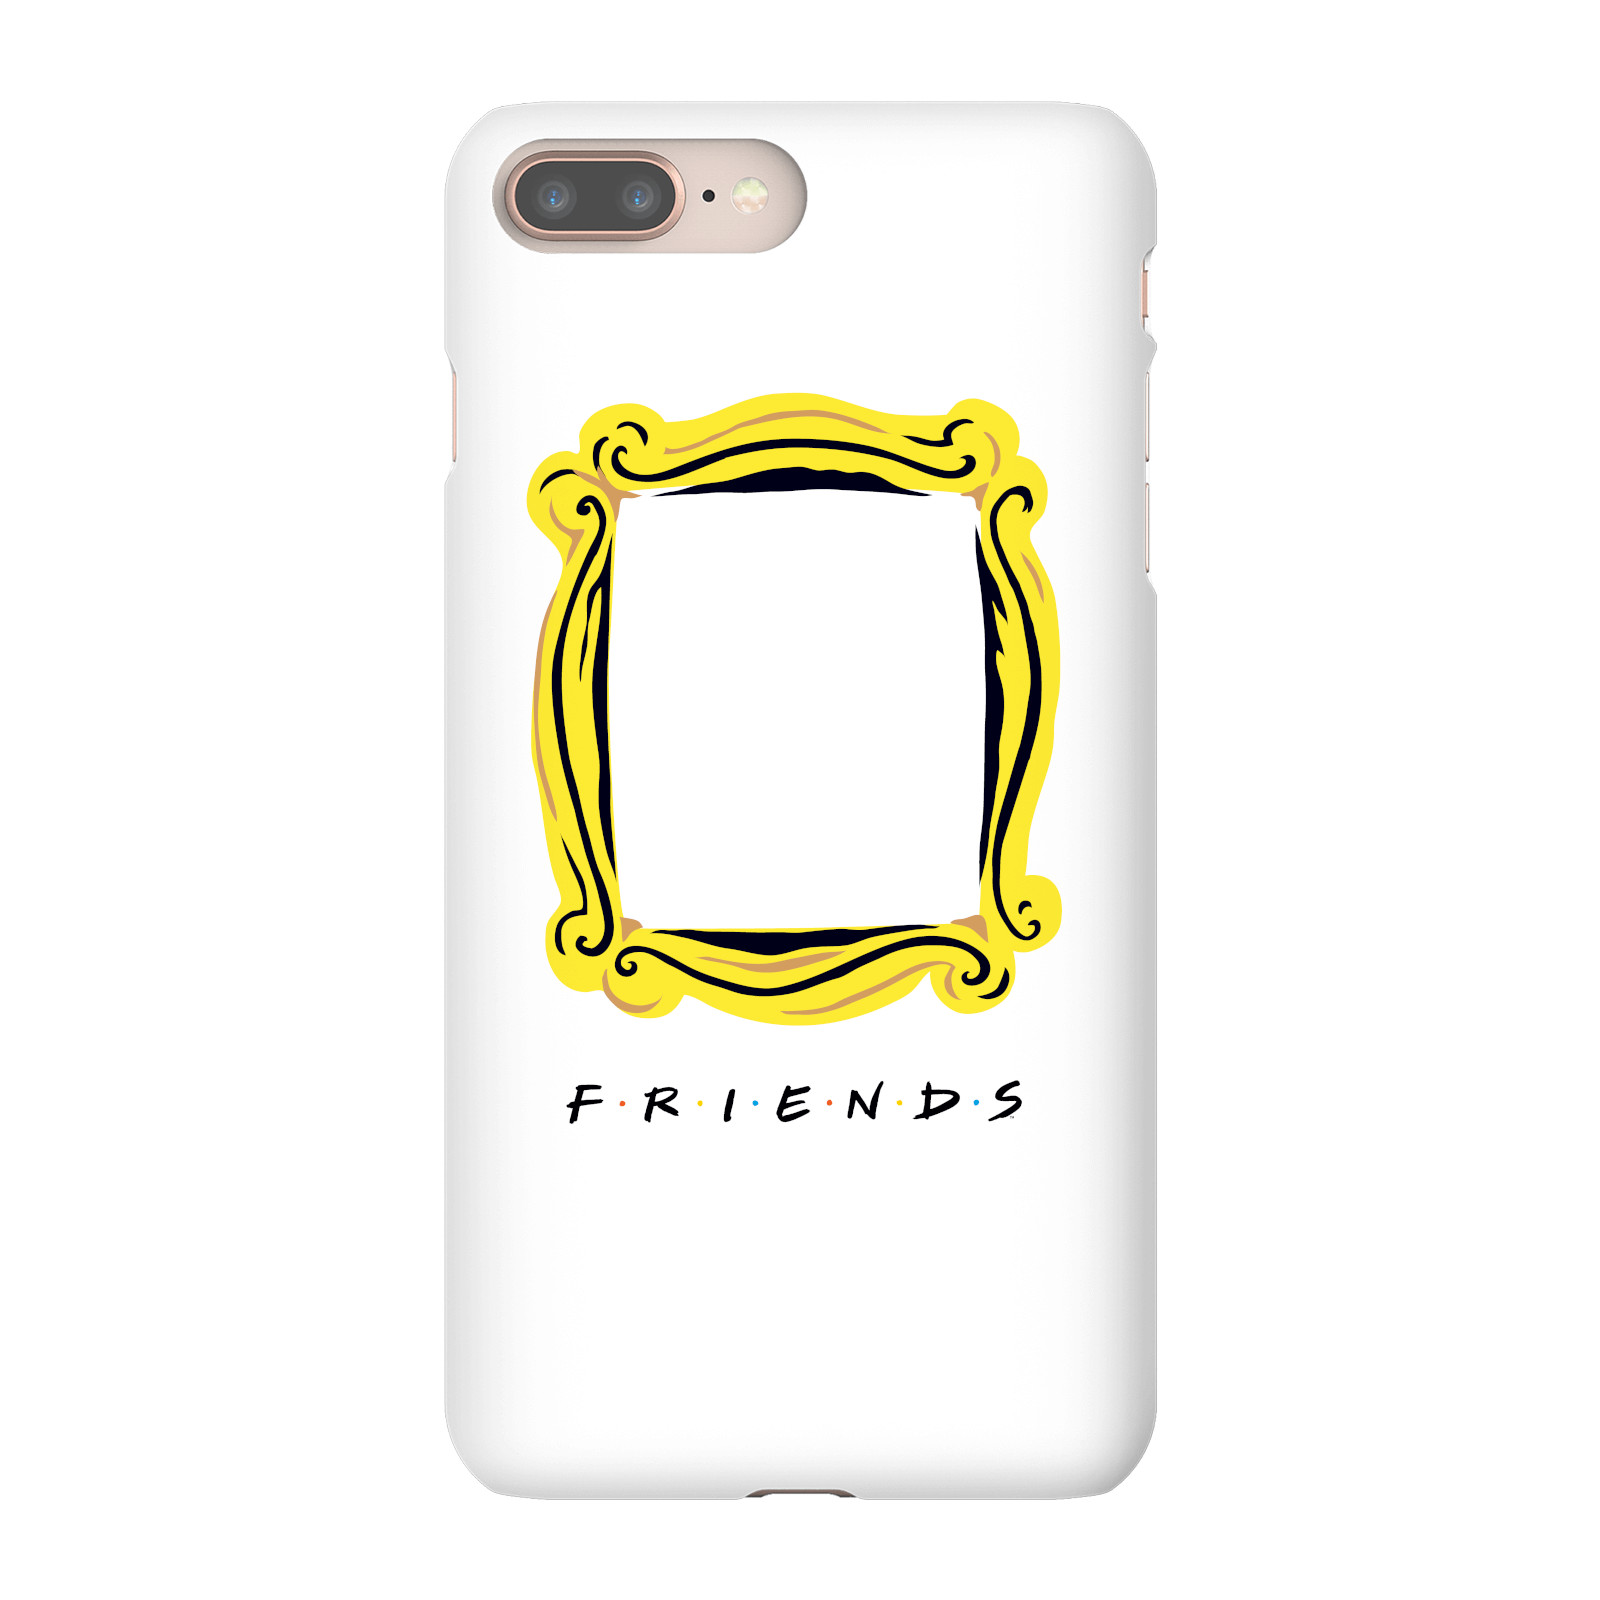 Photos - Case Frame Friends  Phone  for iPhone and Android - iPhone 7 - Snap  - M 